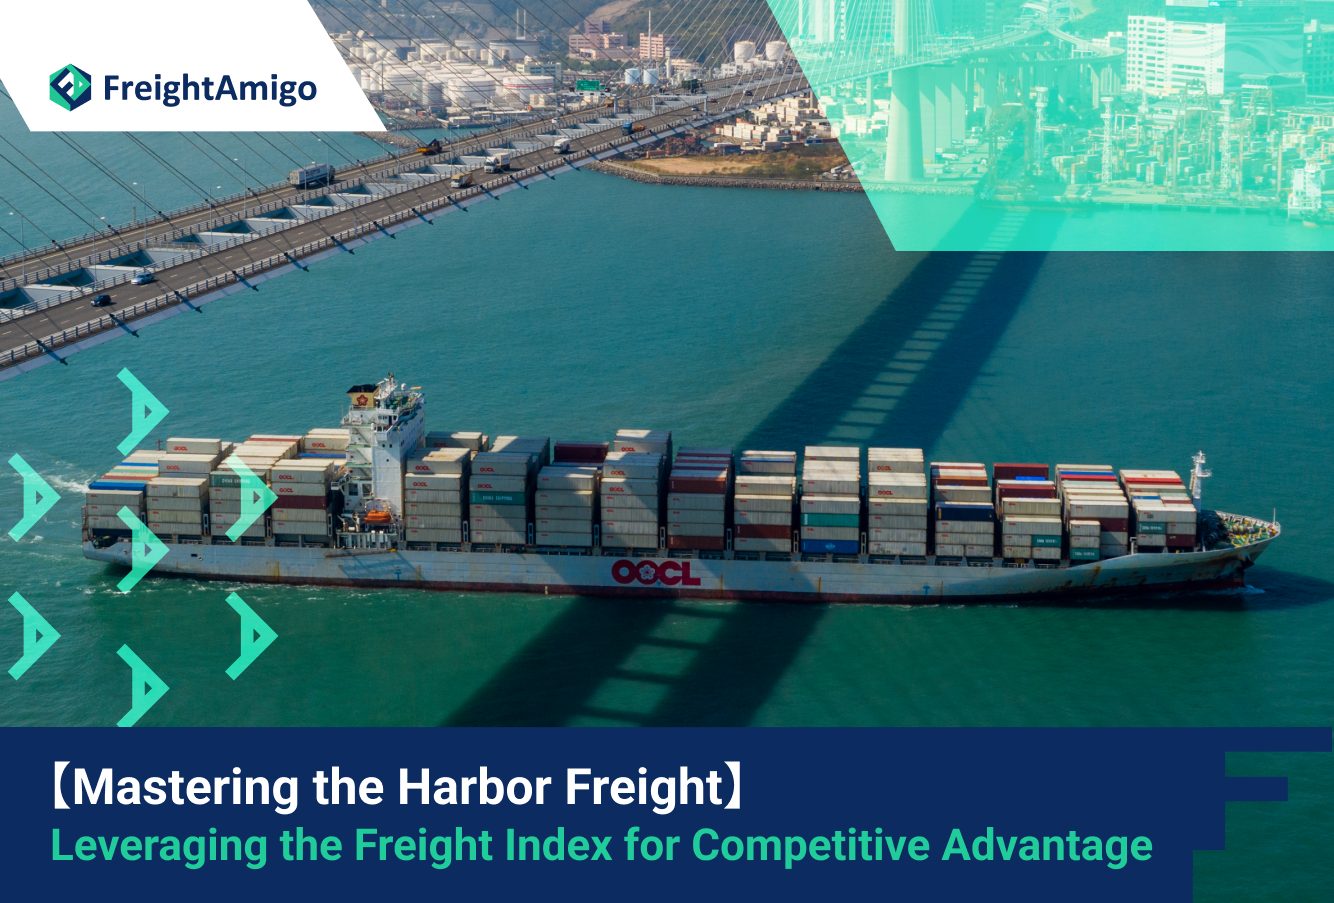 Mastering the Harbor Freight: Leveraging the Freight Index for Competitive Advantage